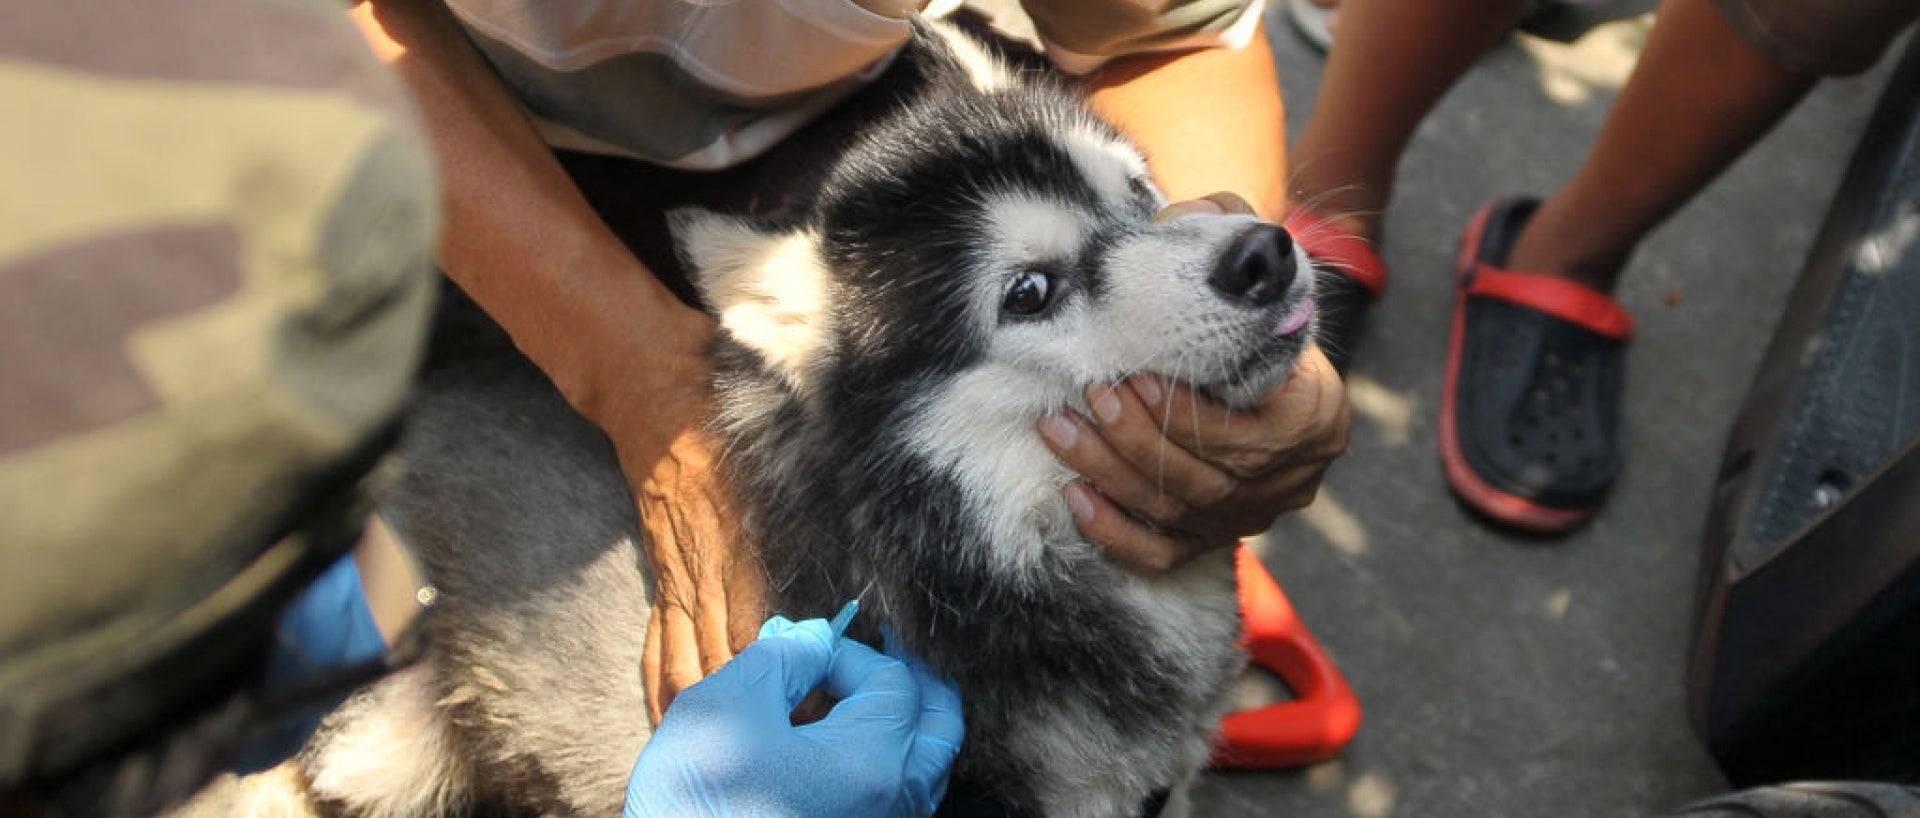 Dog receiving rabies vaccine by gloved hands